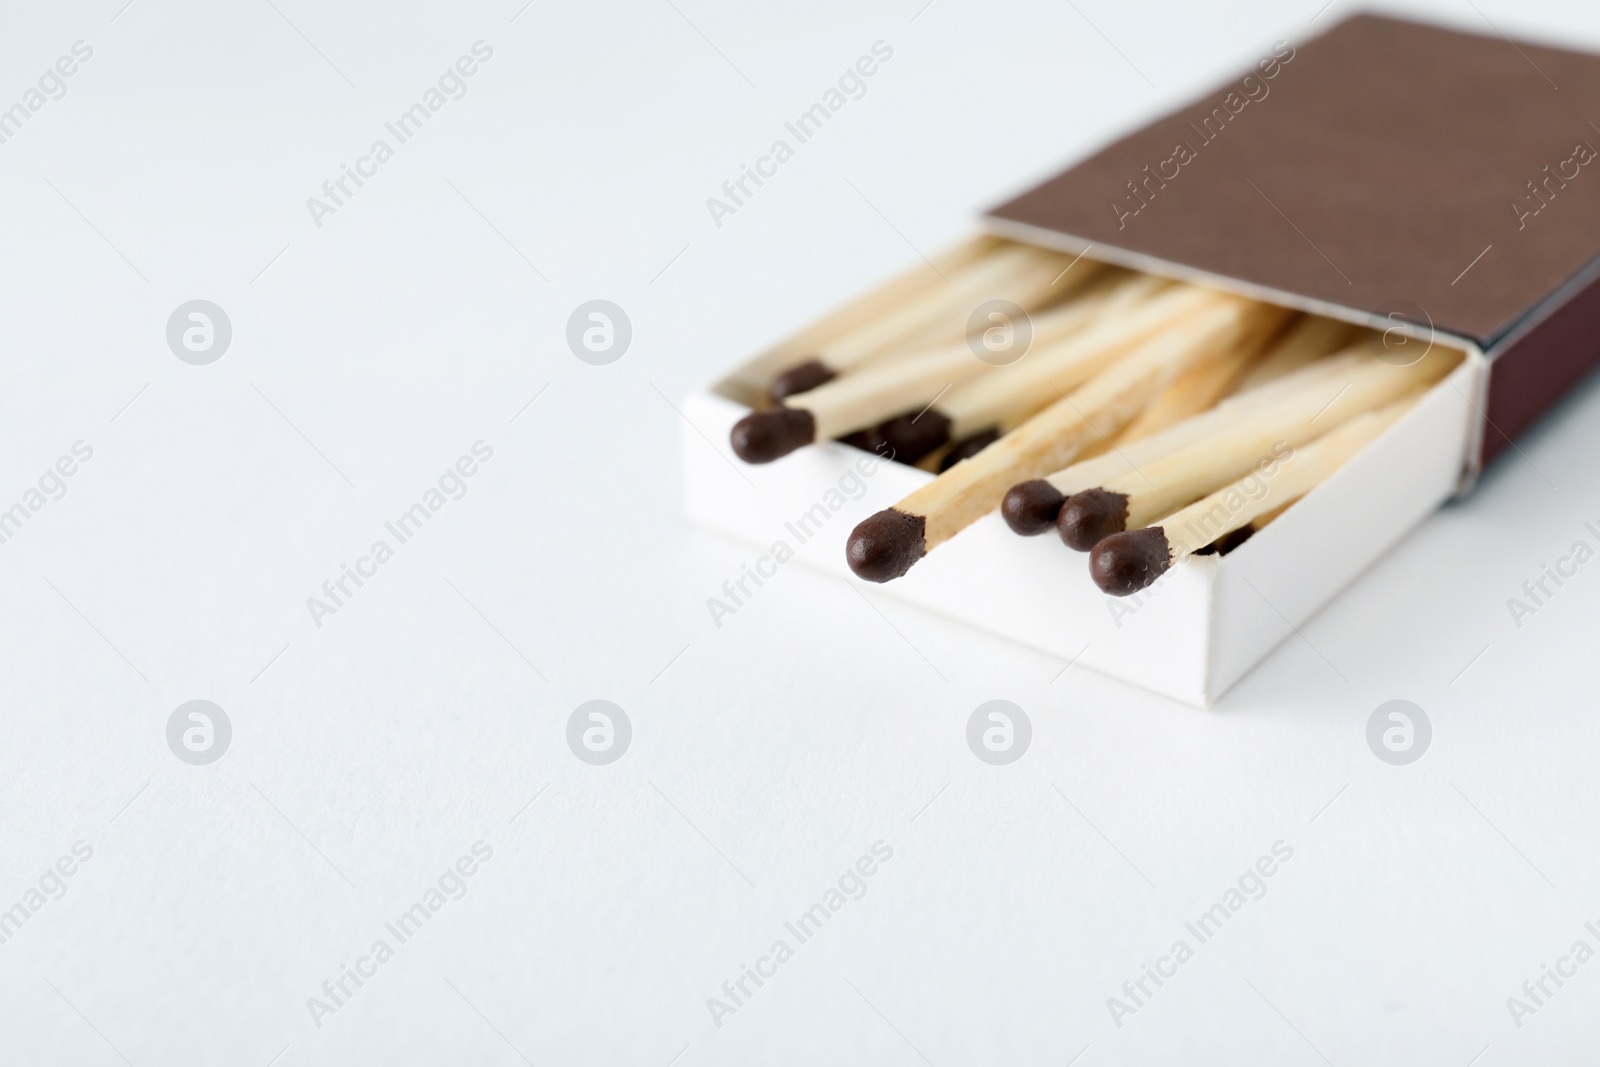 Photo of Cardboard box with matches on light background